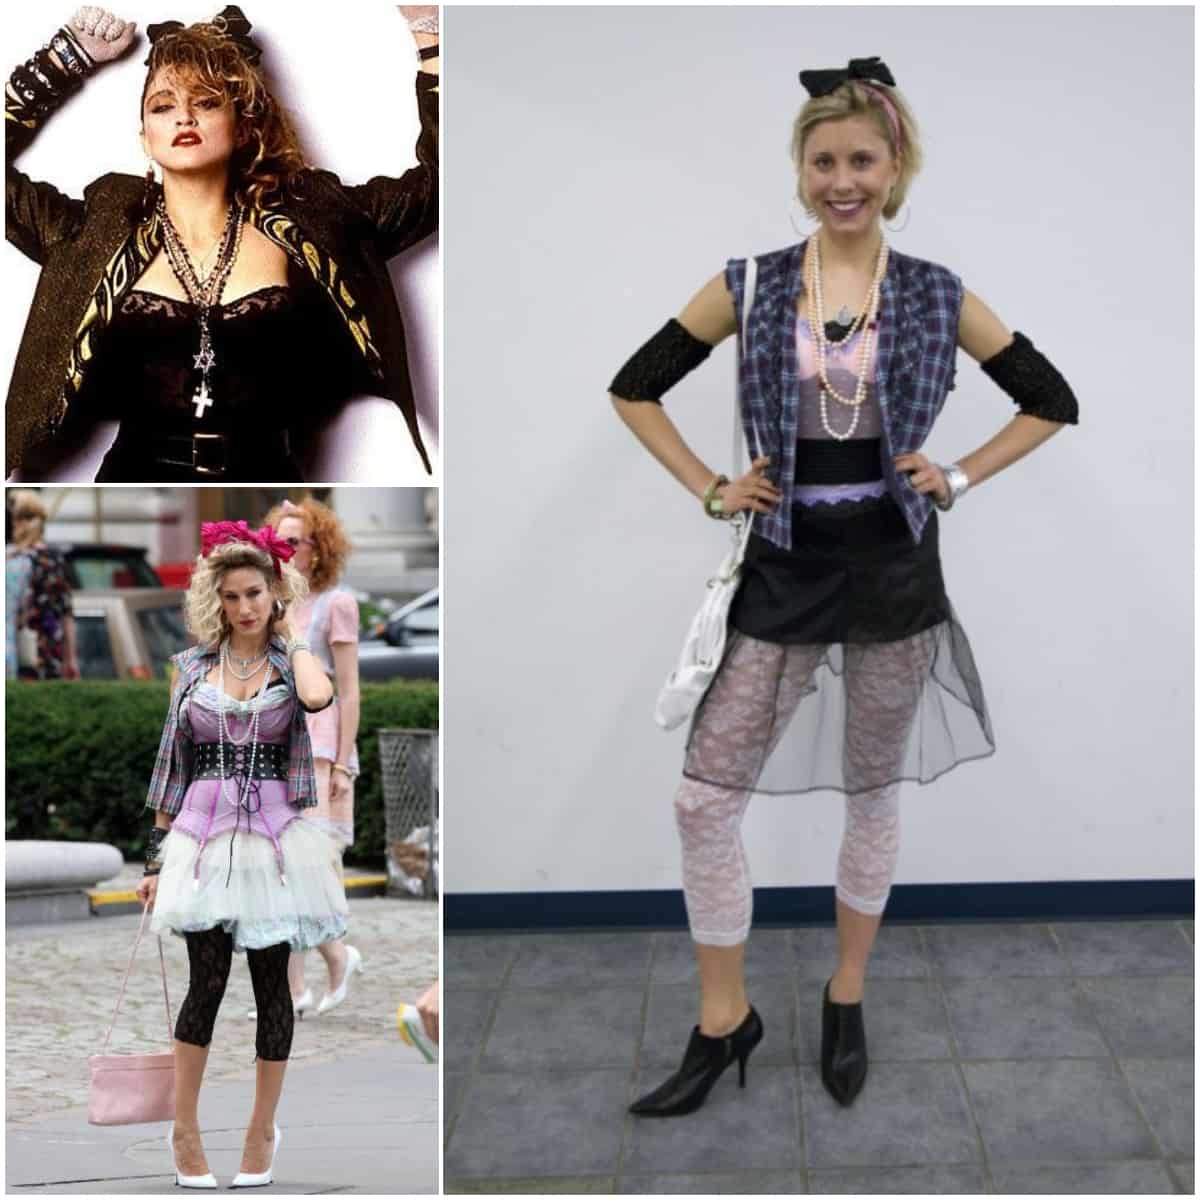 Recreating Madonna 80s Look: How to Rock Madonna-Style (With Final Outfits)  - Sammy D. Vintage